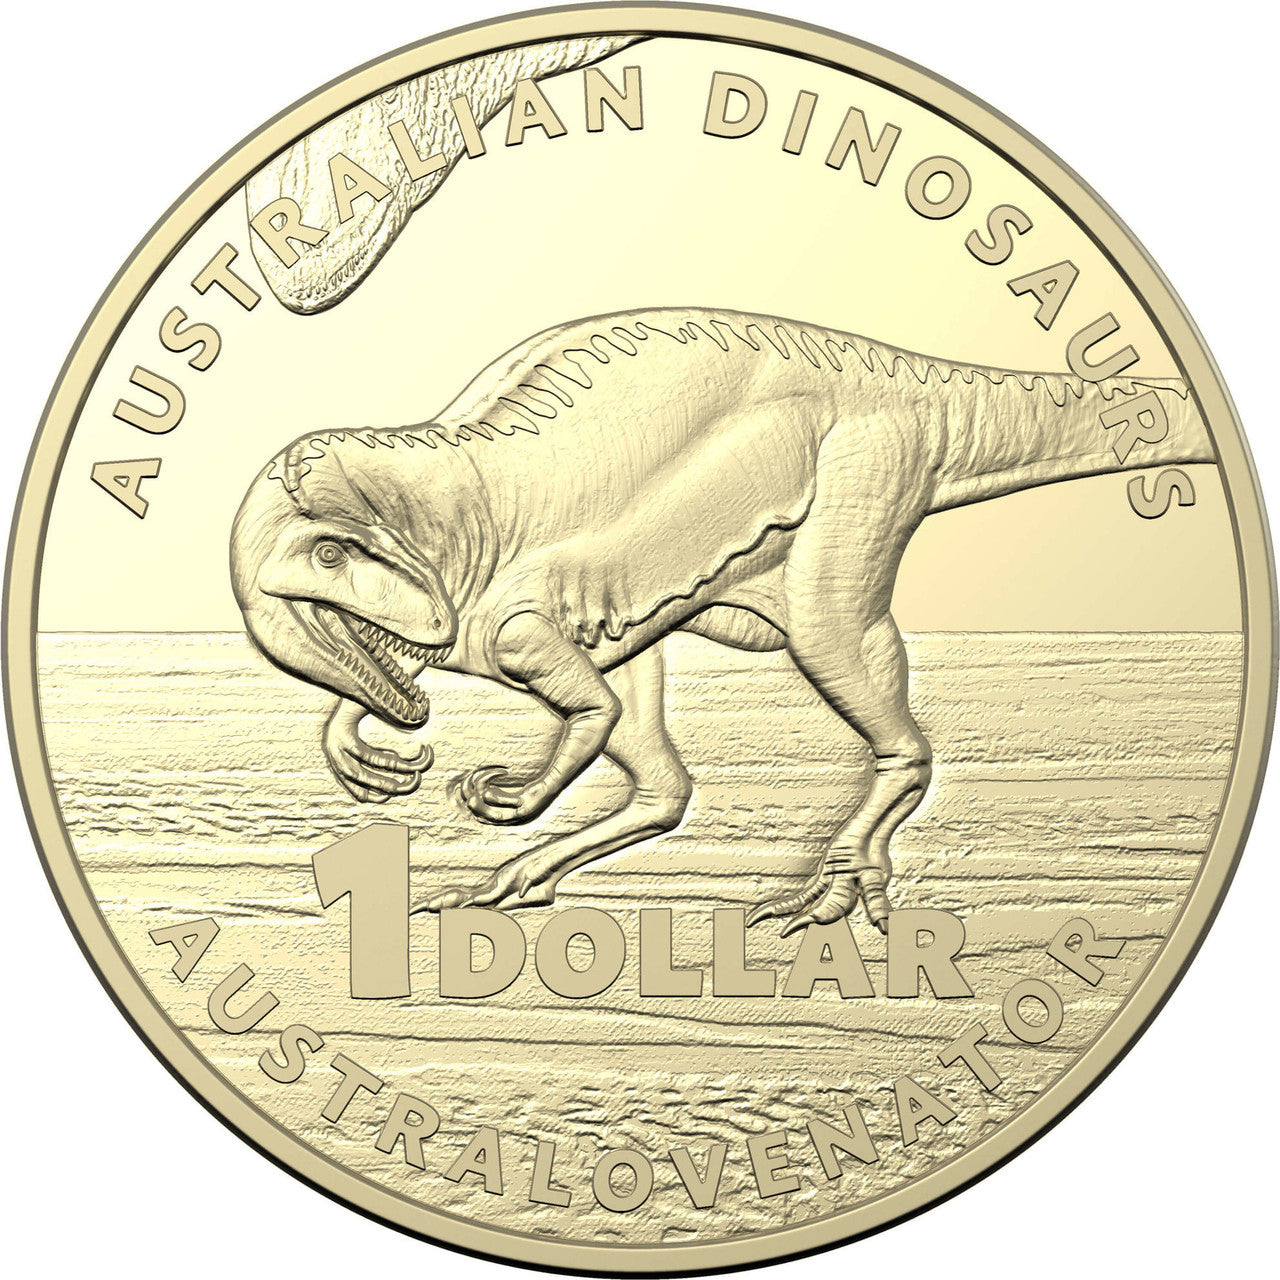 Australian Dinosaurs 2022 Proof Four-Coin Collection